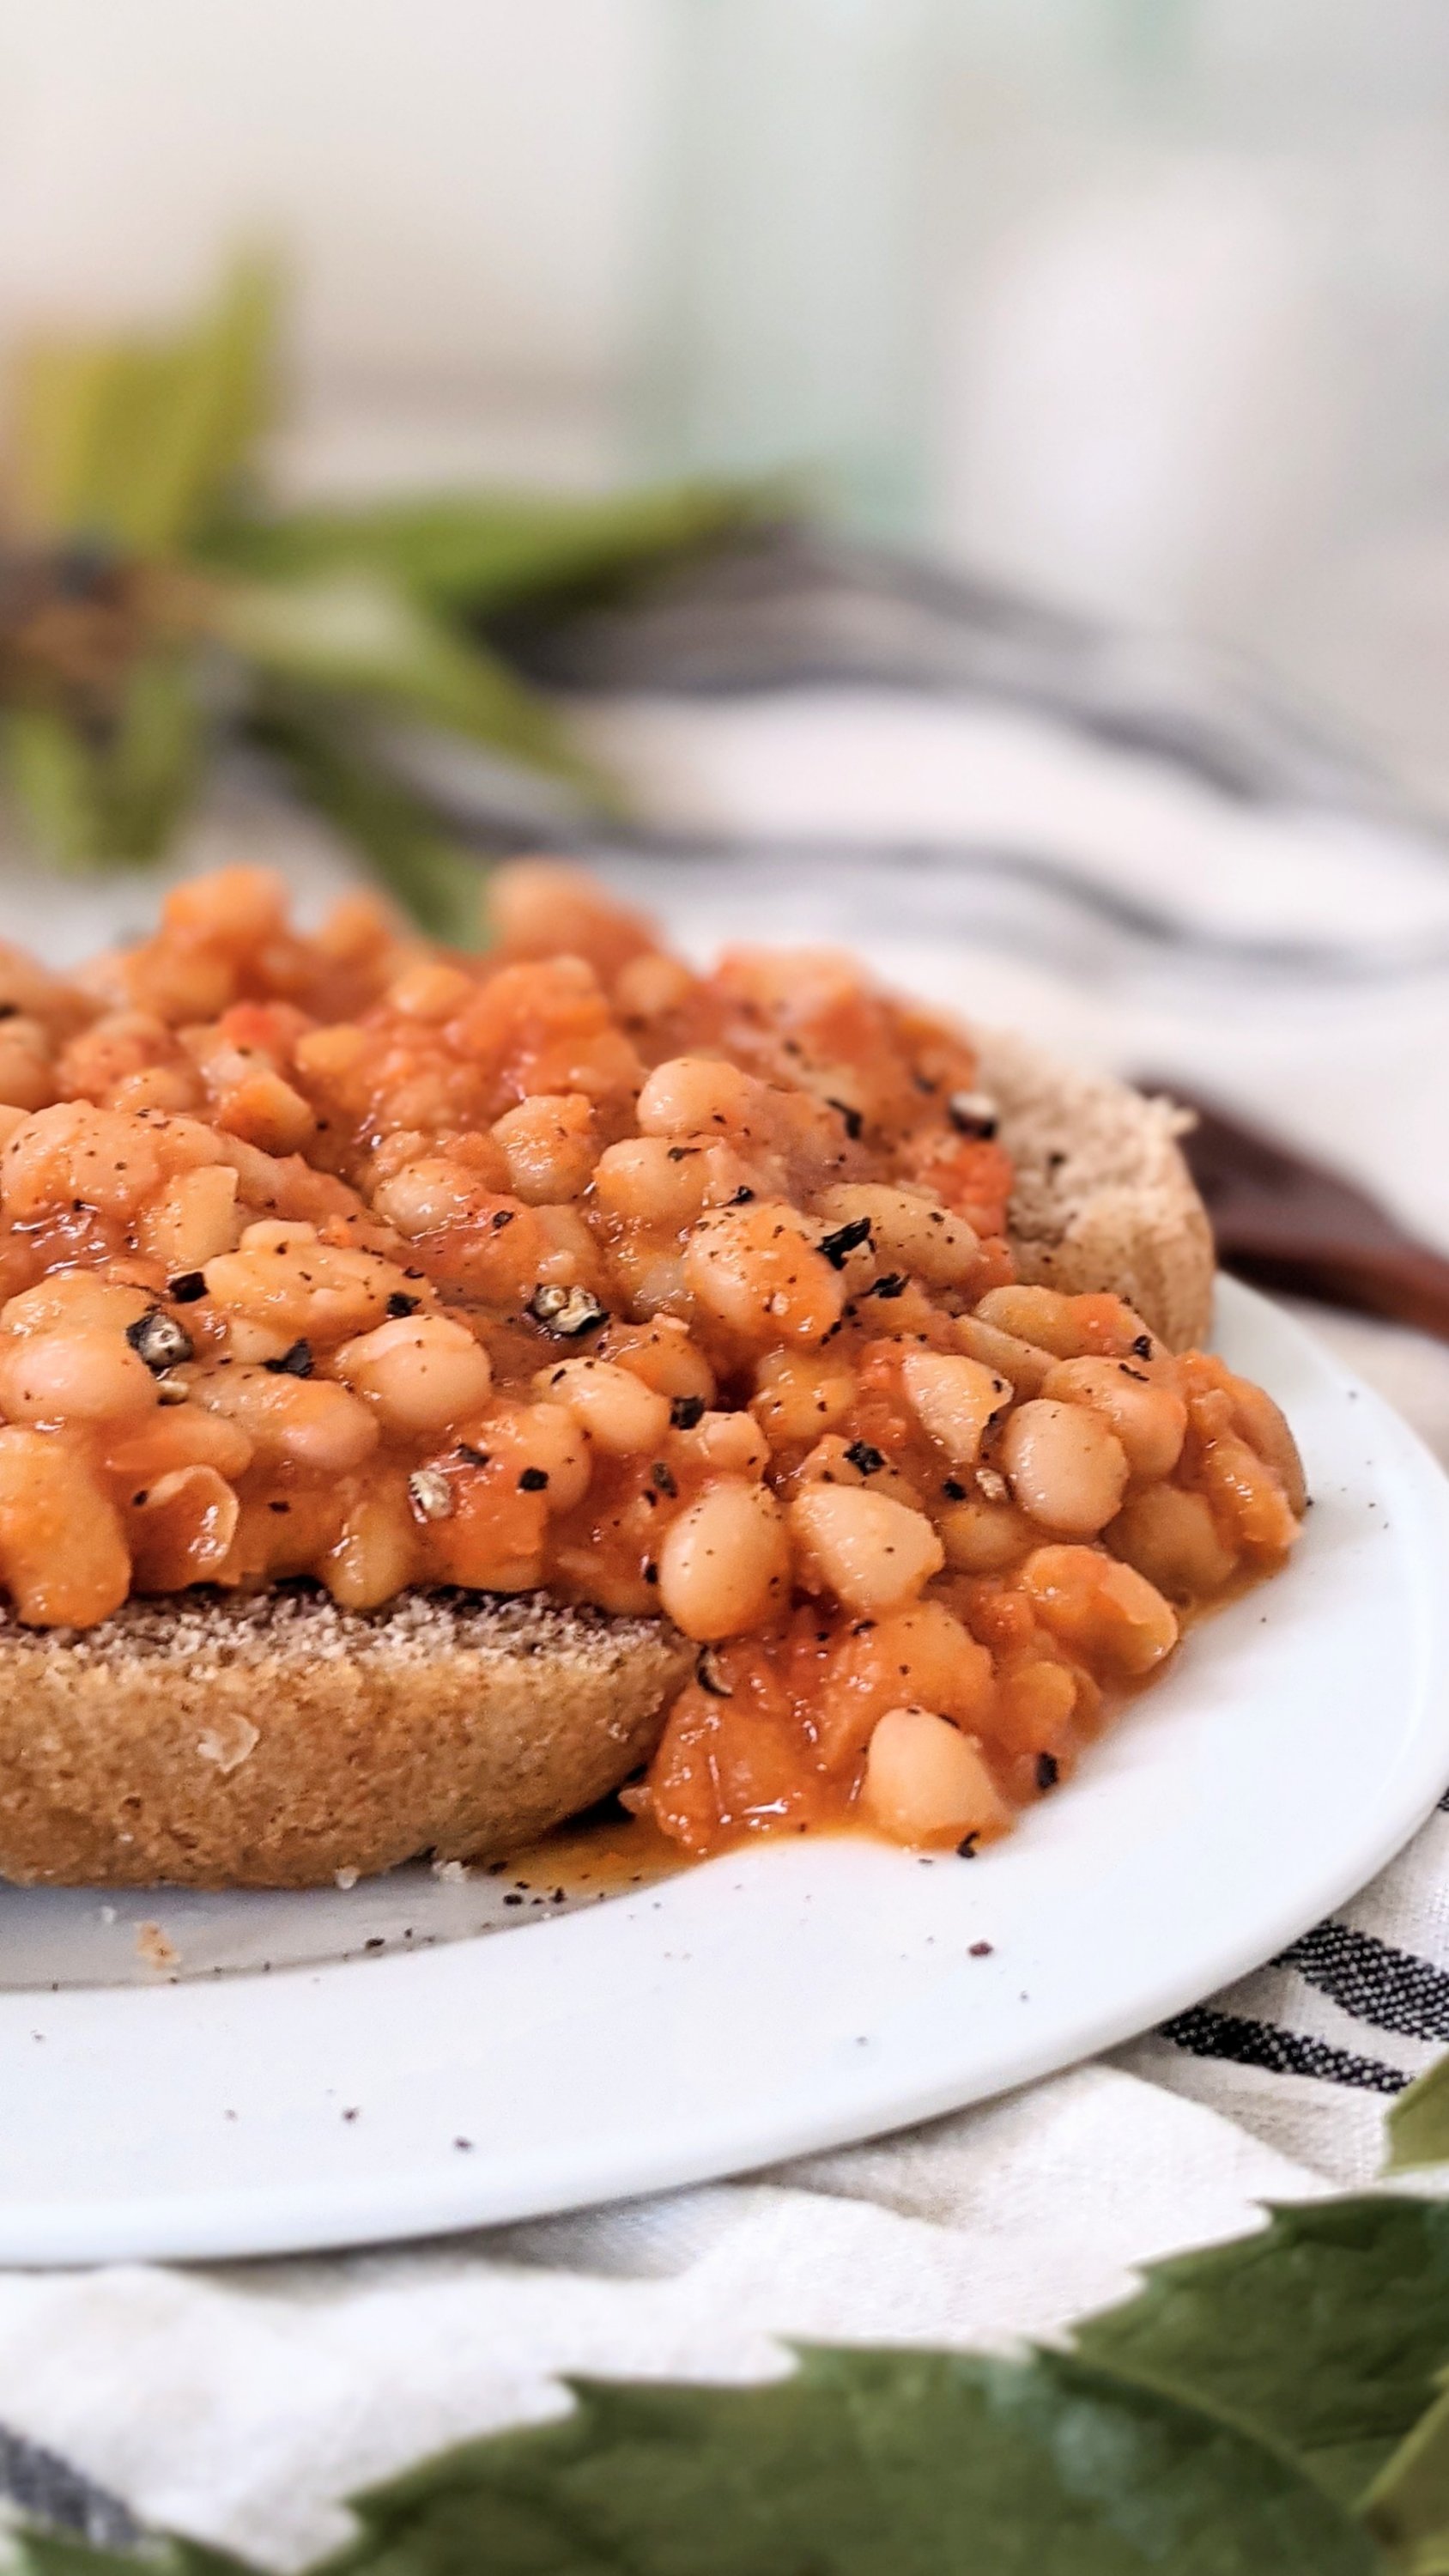 vegan beans on toast recipe vegan baked beans for breakfast on toasted gluten free or vegan brad egg free dairy free brunch recipes british food recipes from an american